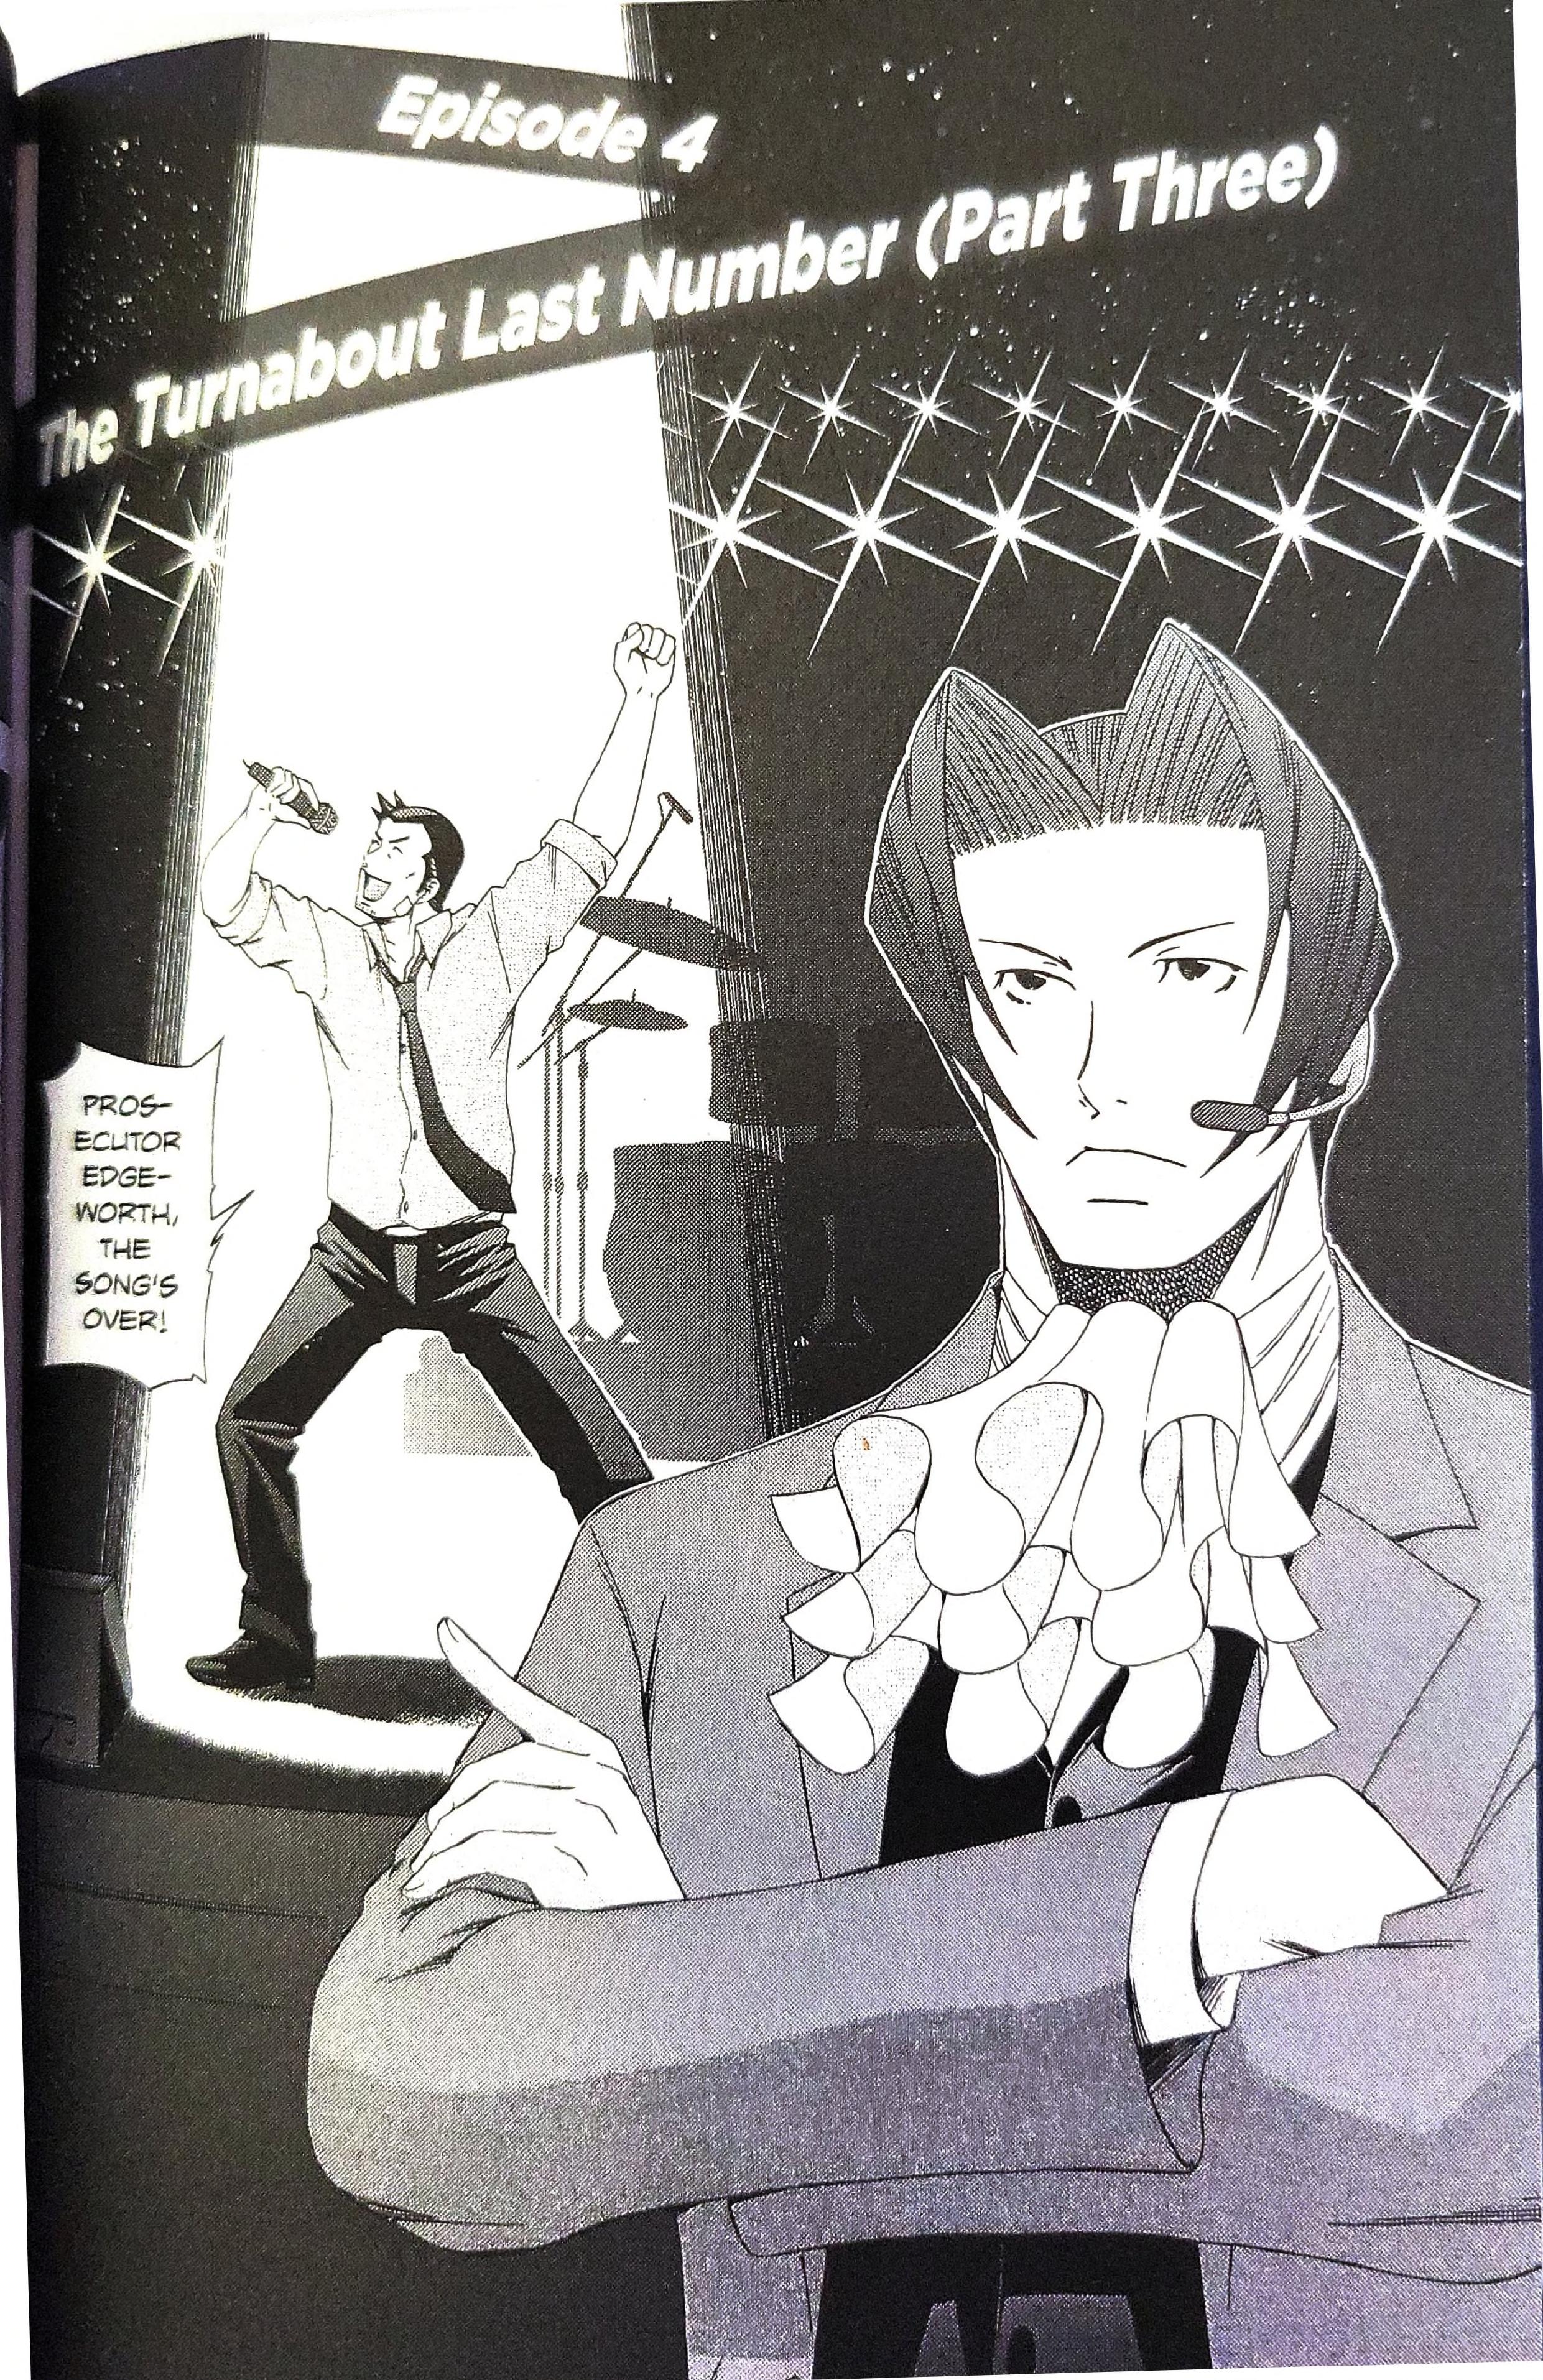 Gyakuten Kenji Vol.1 Chapter 4: The Turnabout Last Number (3) - Picture 3